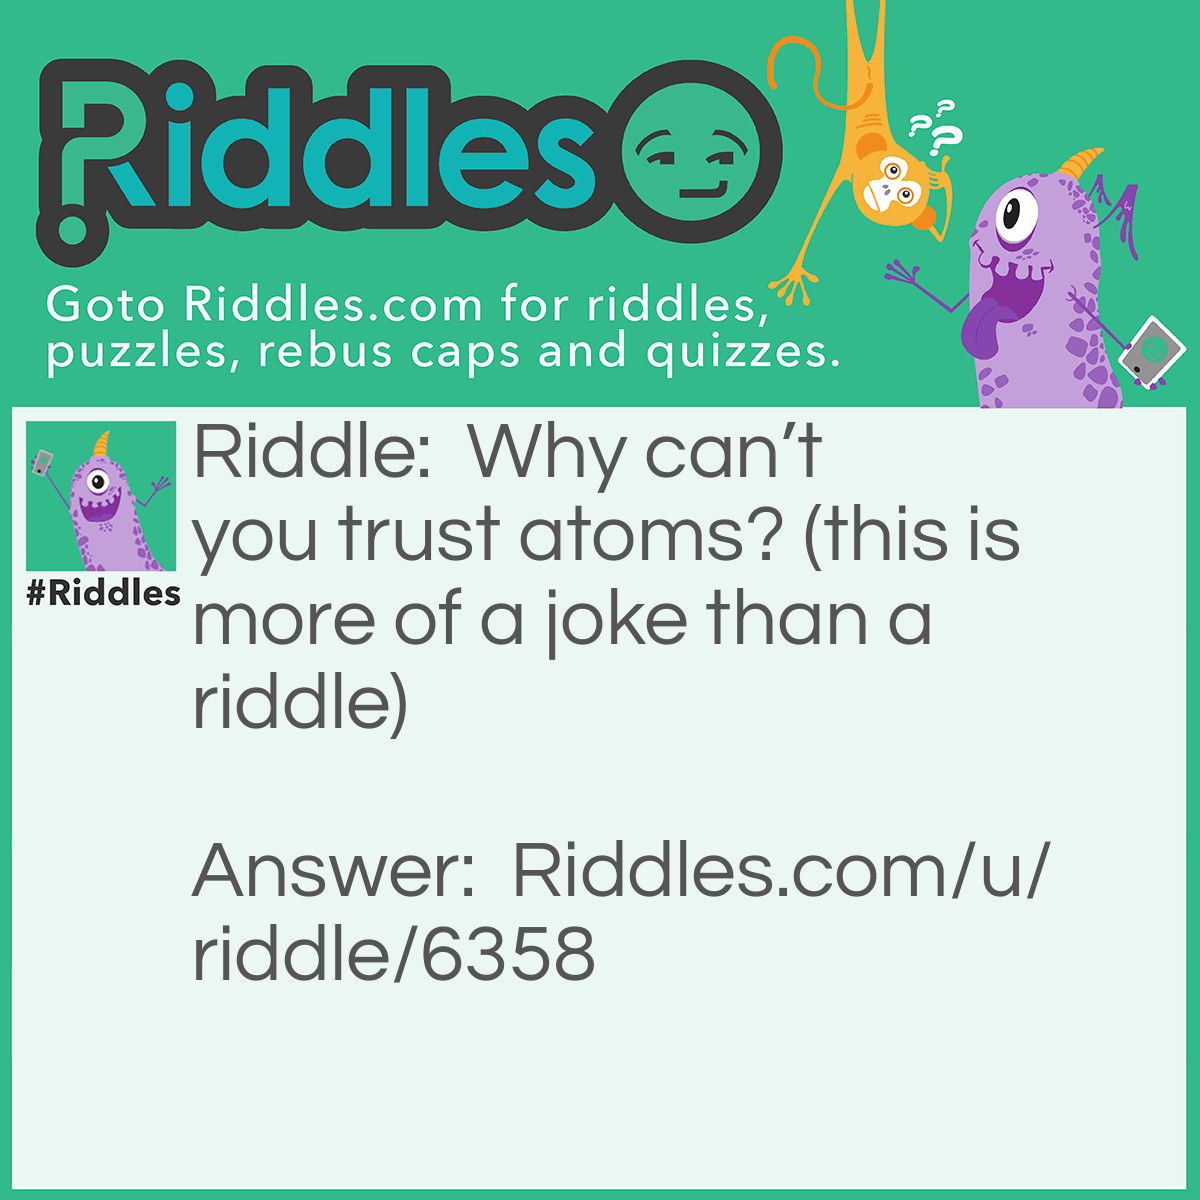 Riddle: Why can't you trust atoms? (this is more of a joke than a riddle) Answer: Atoms make up everything! Get it?